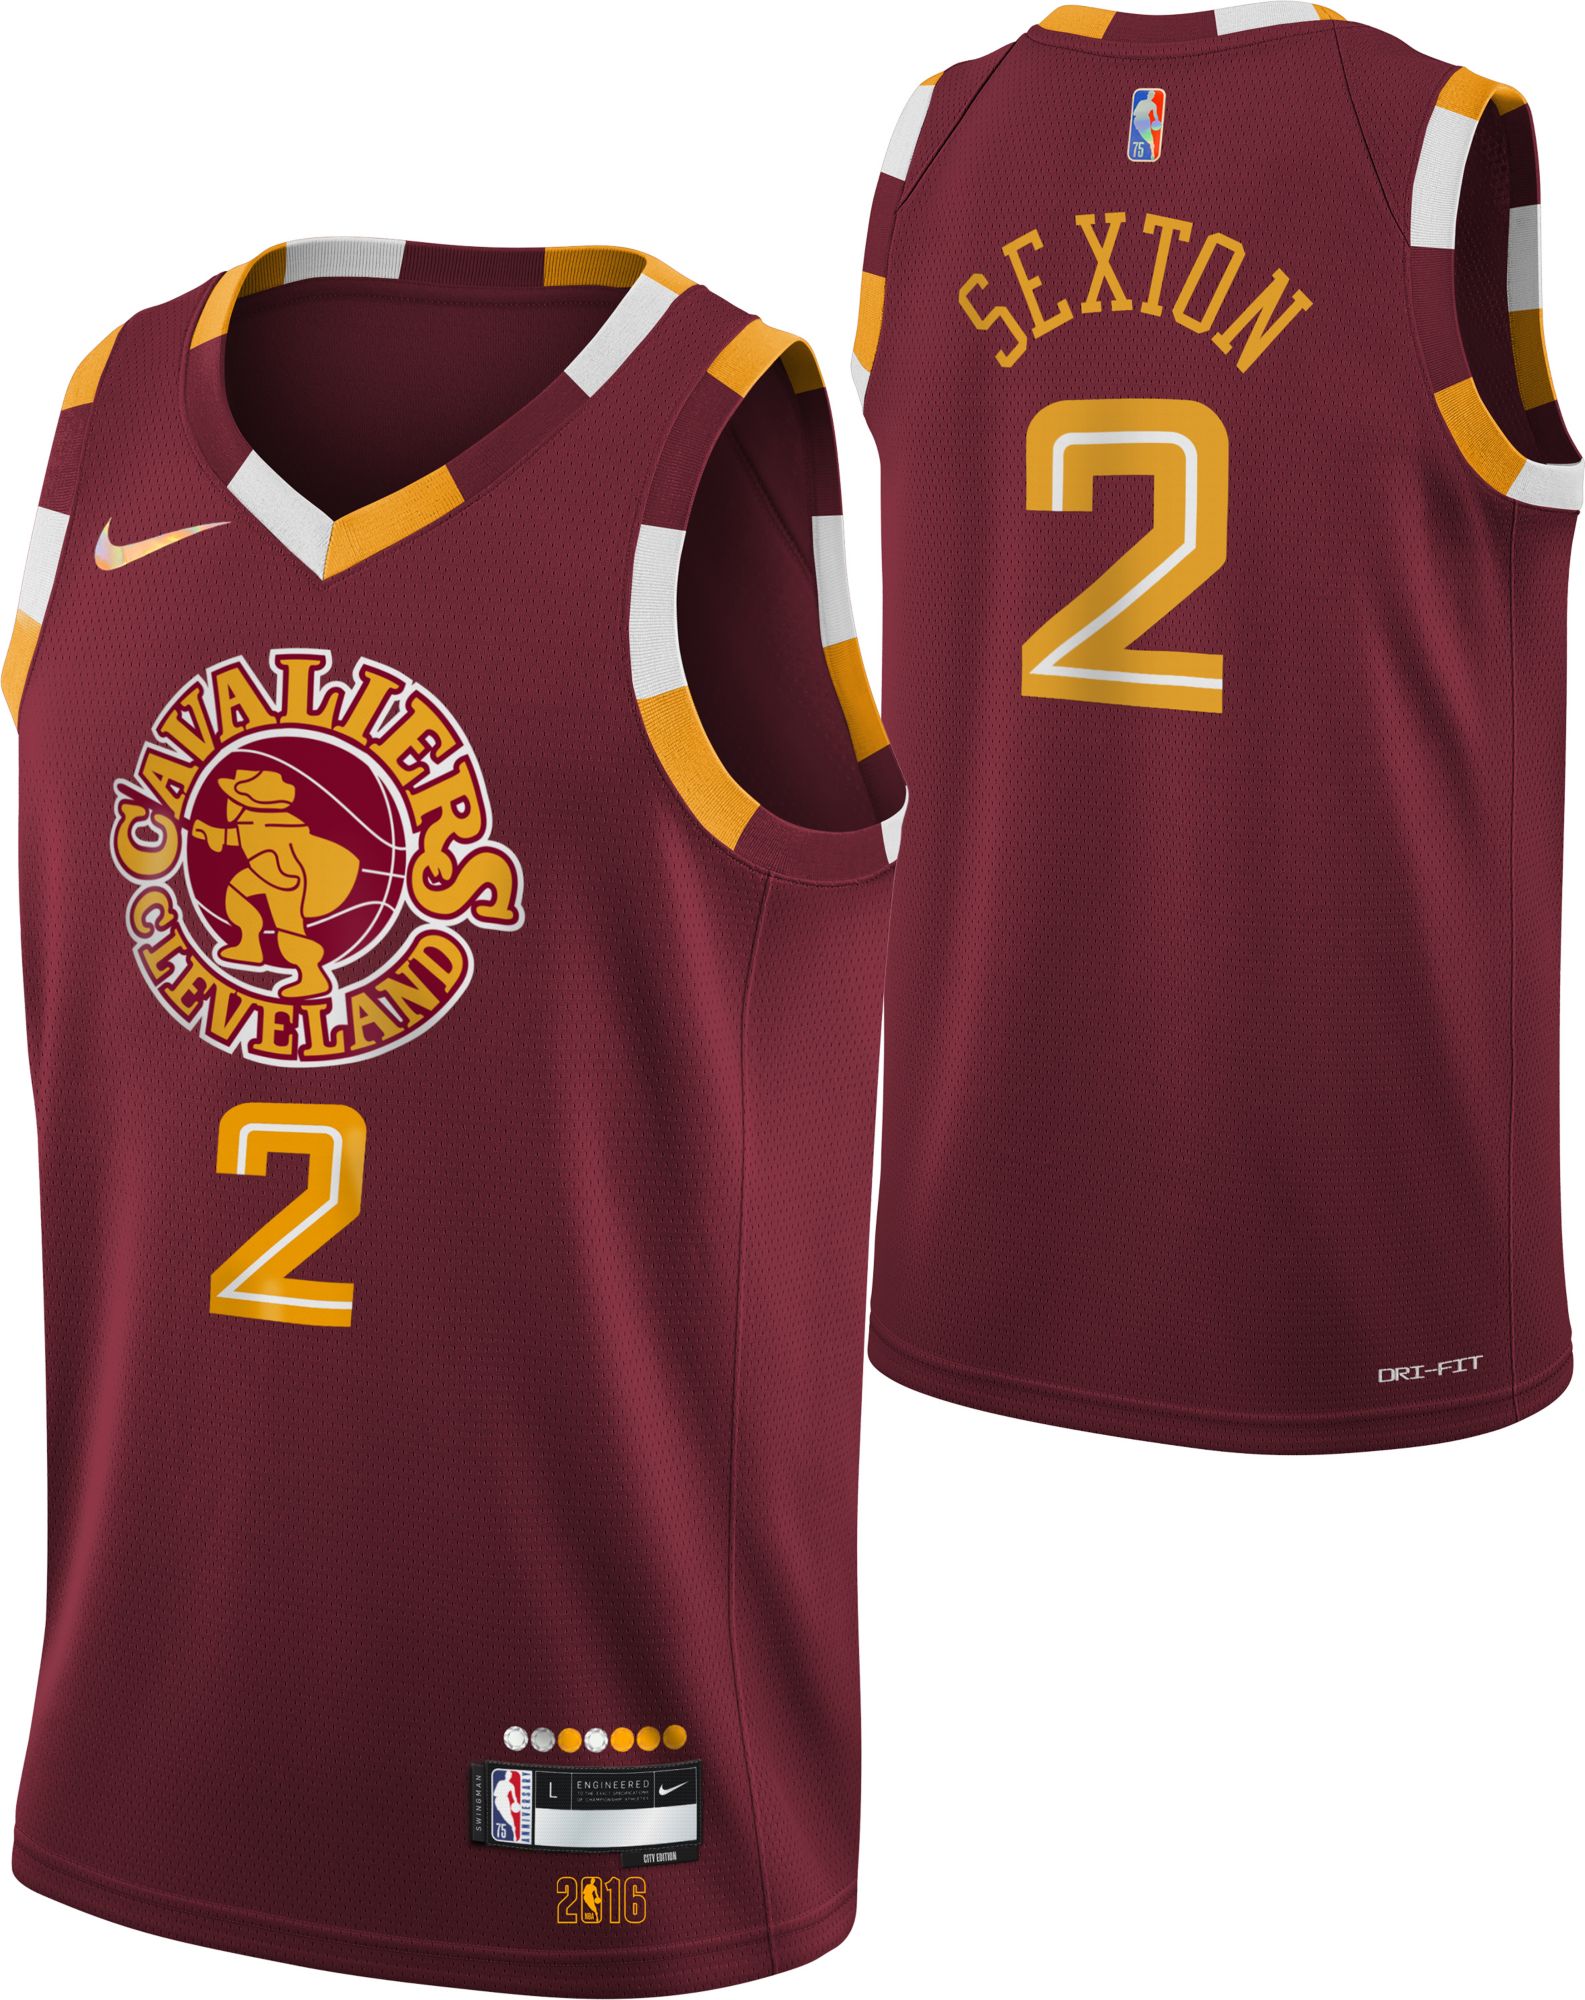 Cleveland Cavaliers Nike Women's 2021/22 City Edition Essential